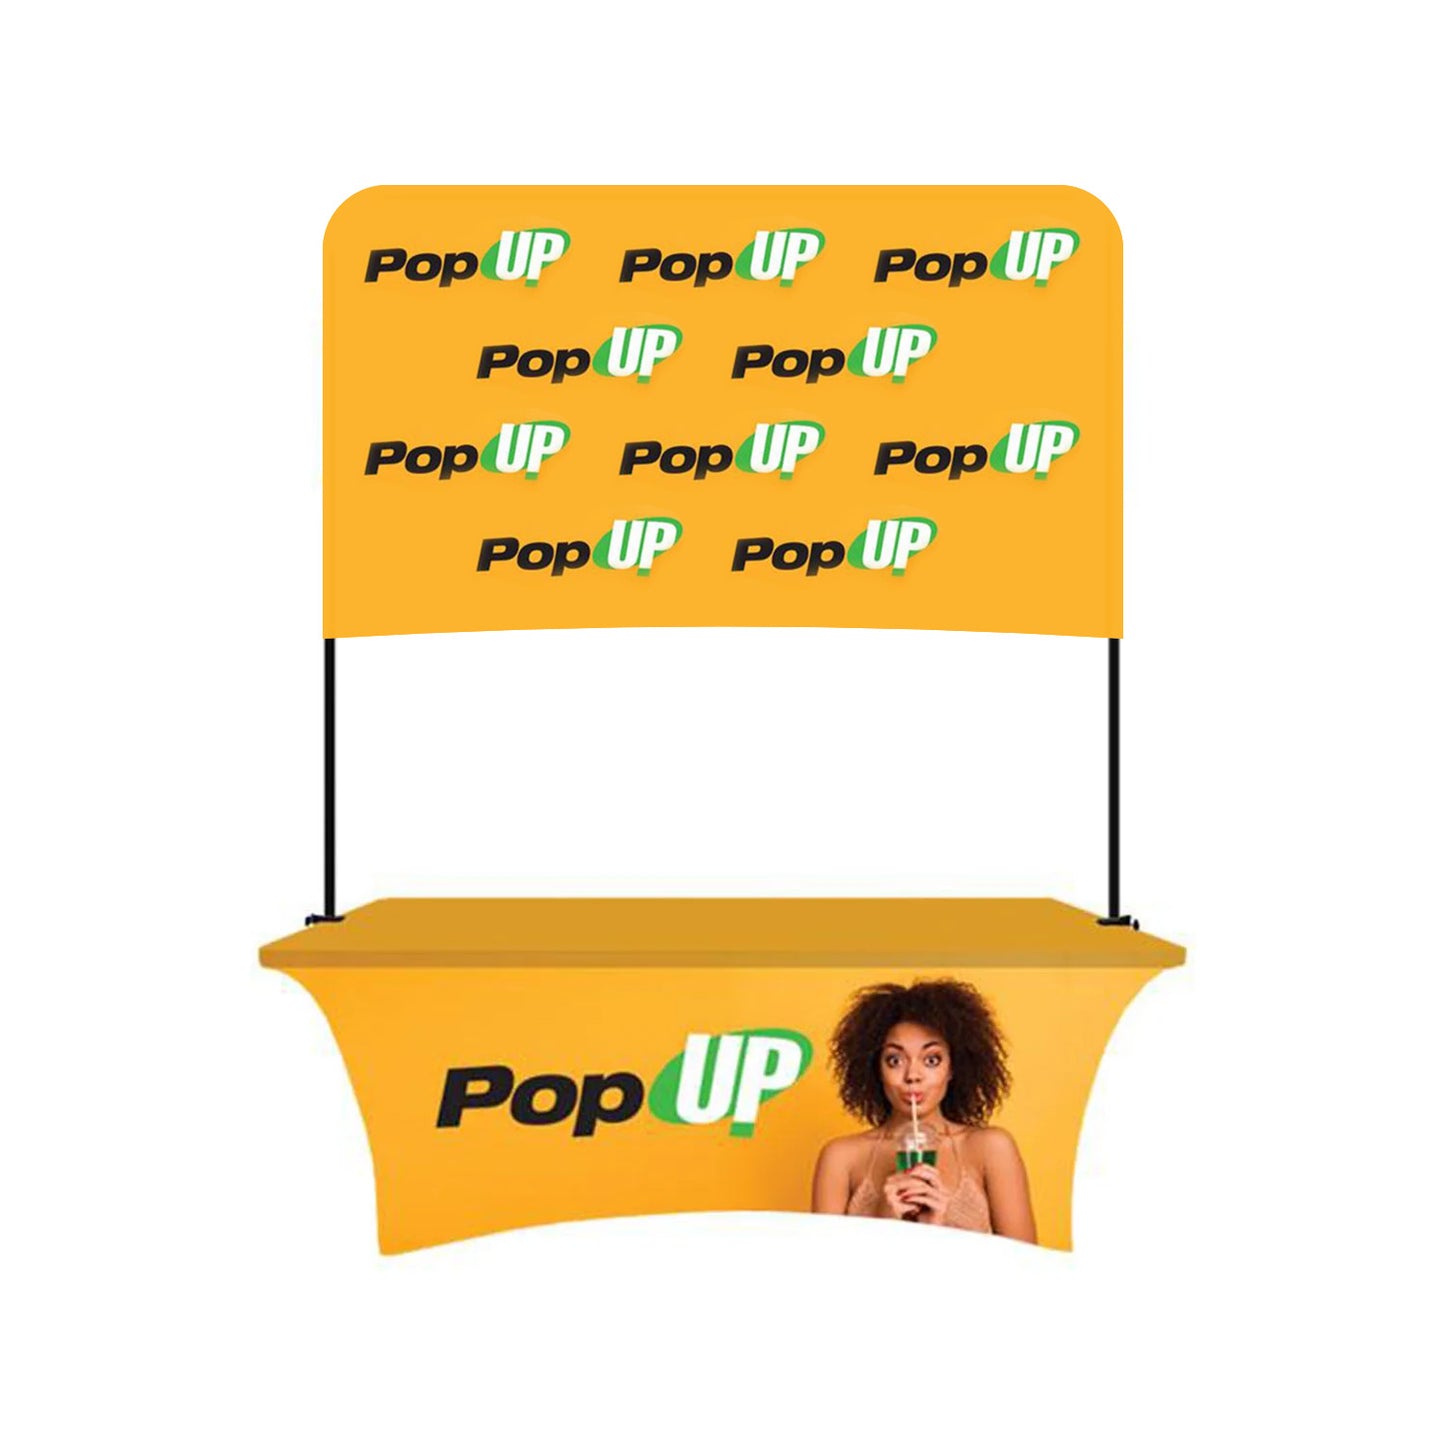 6' TABLE COVER WITH OVERHEAD BANNER DISPLAY